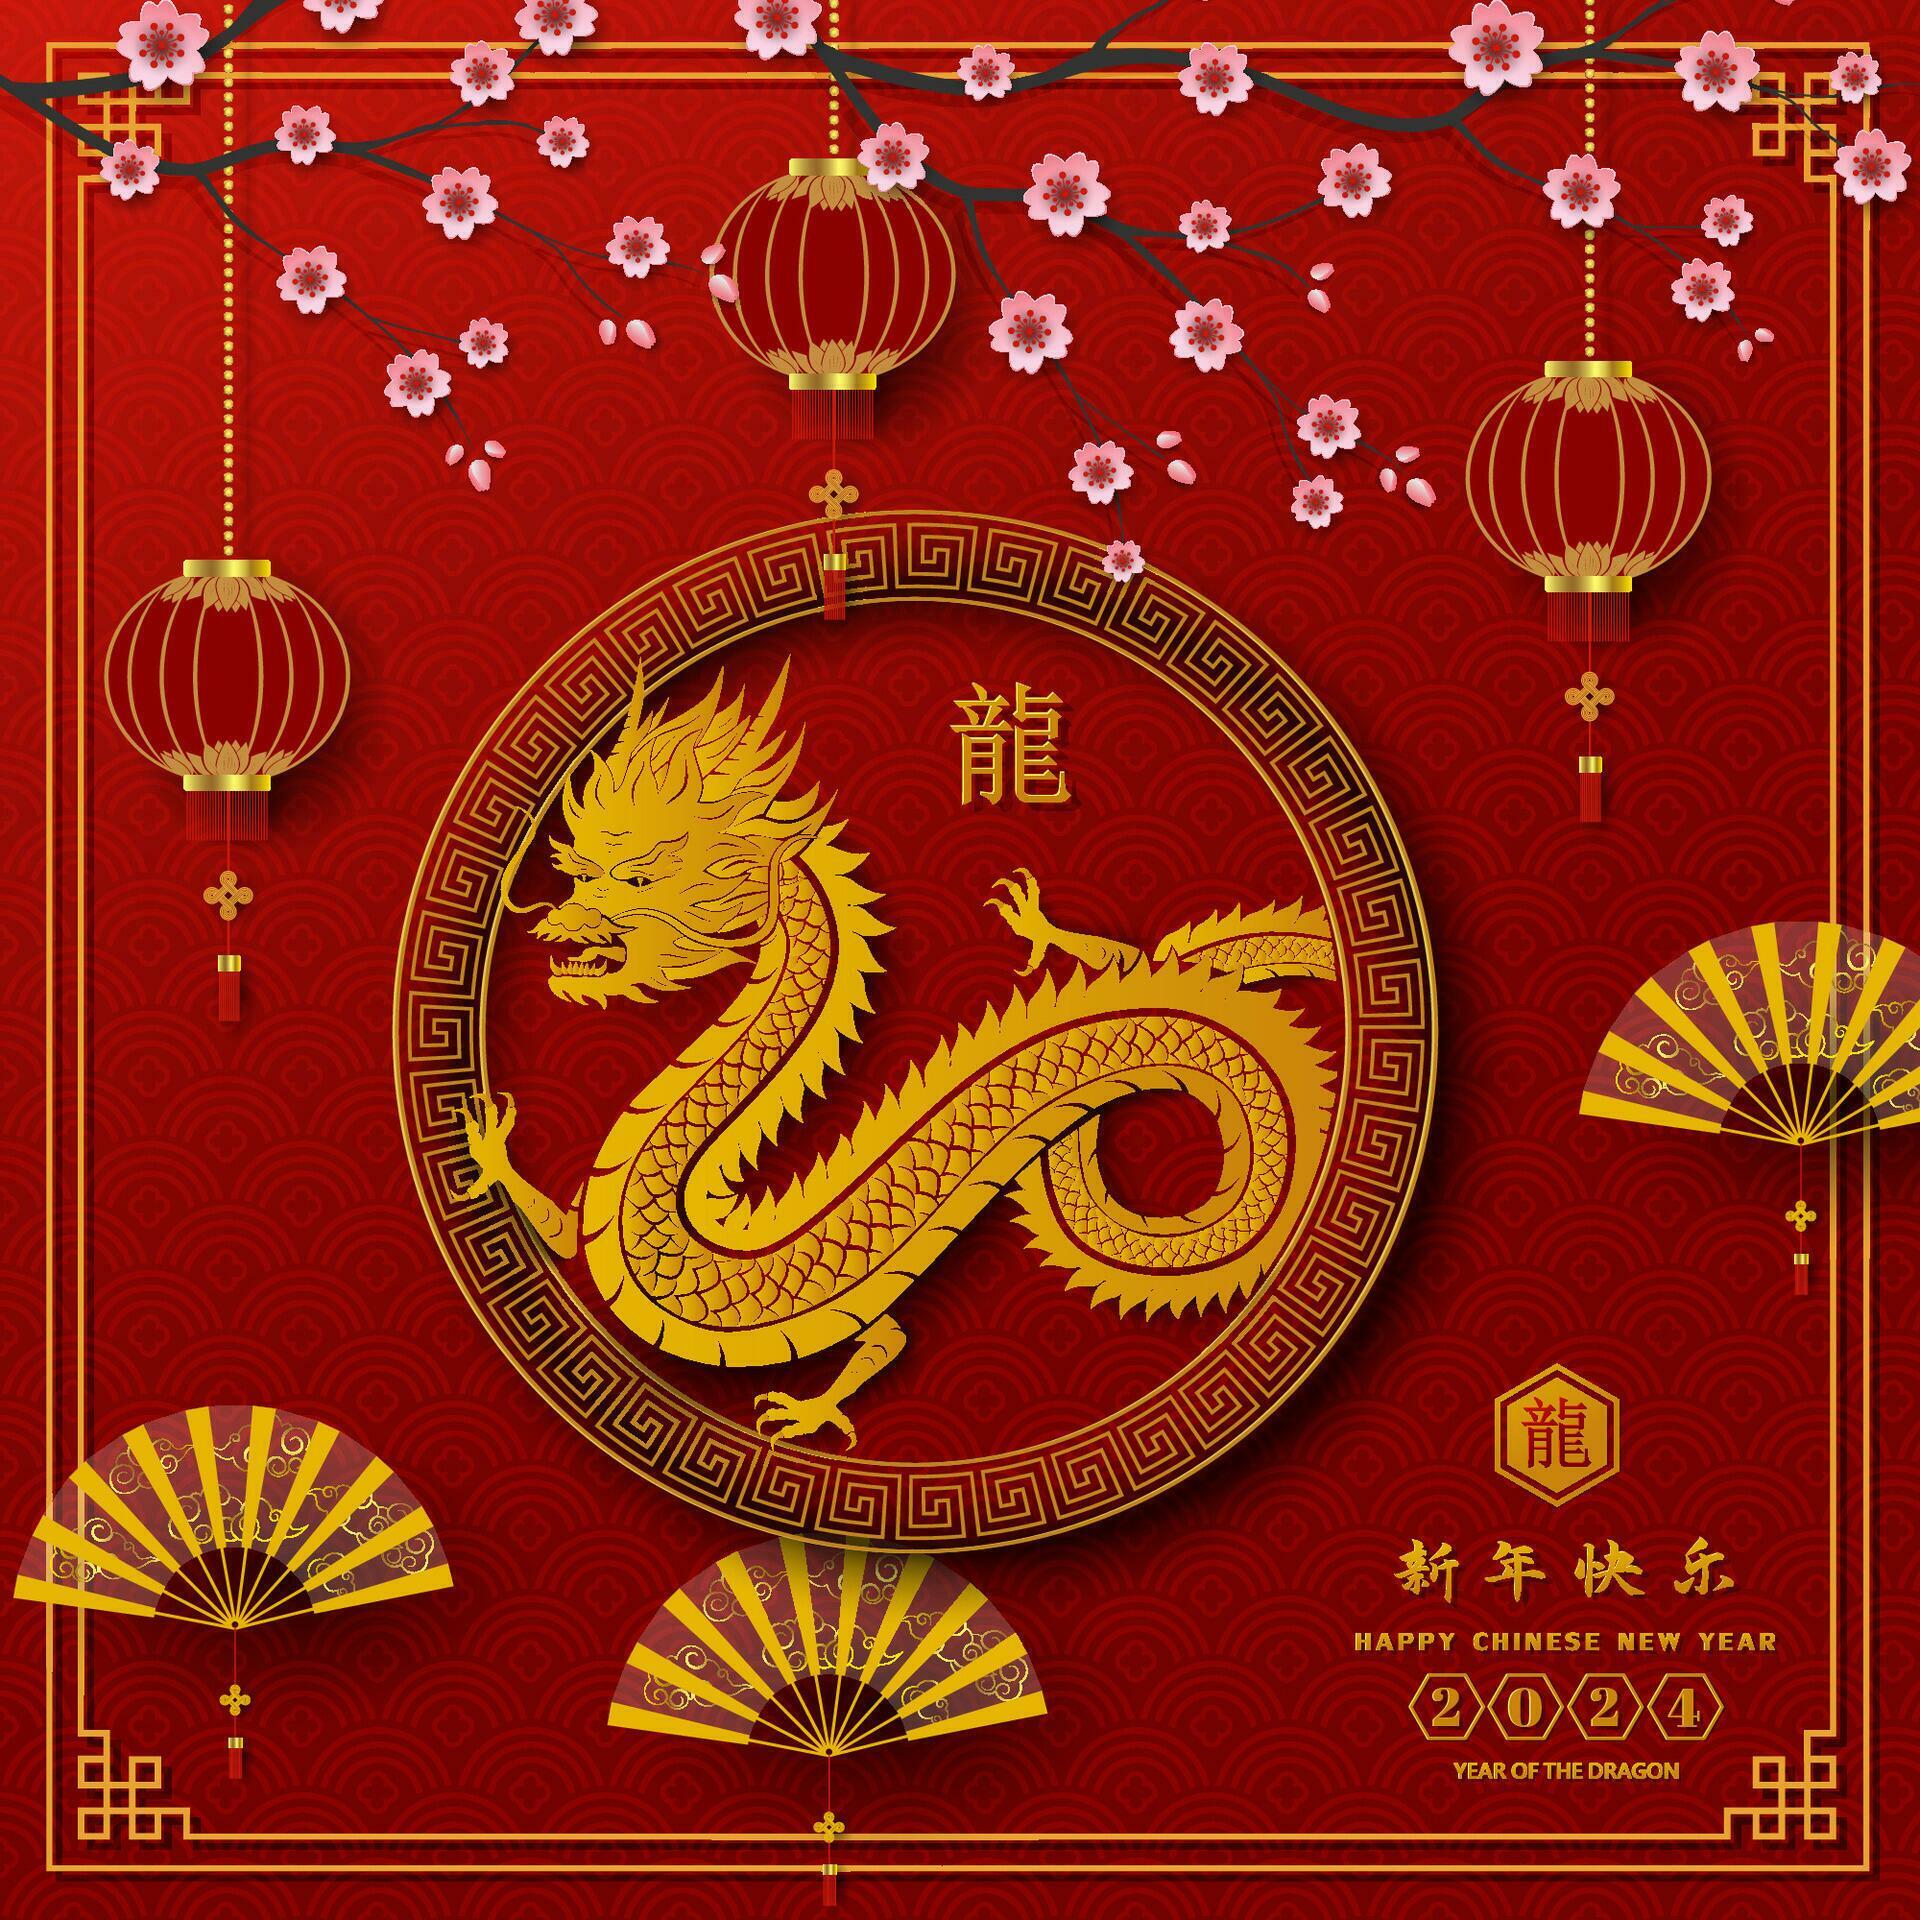 Happy Chinese new year 2024,dragon zodiac sign with asian elements on ...